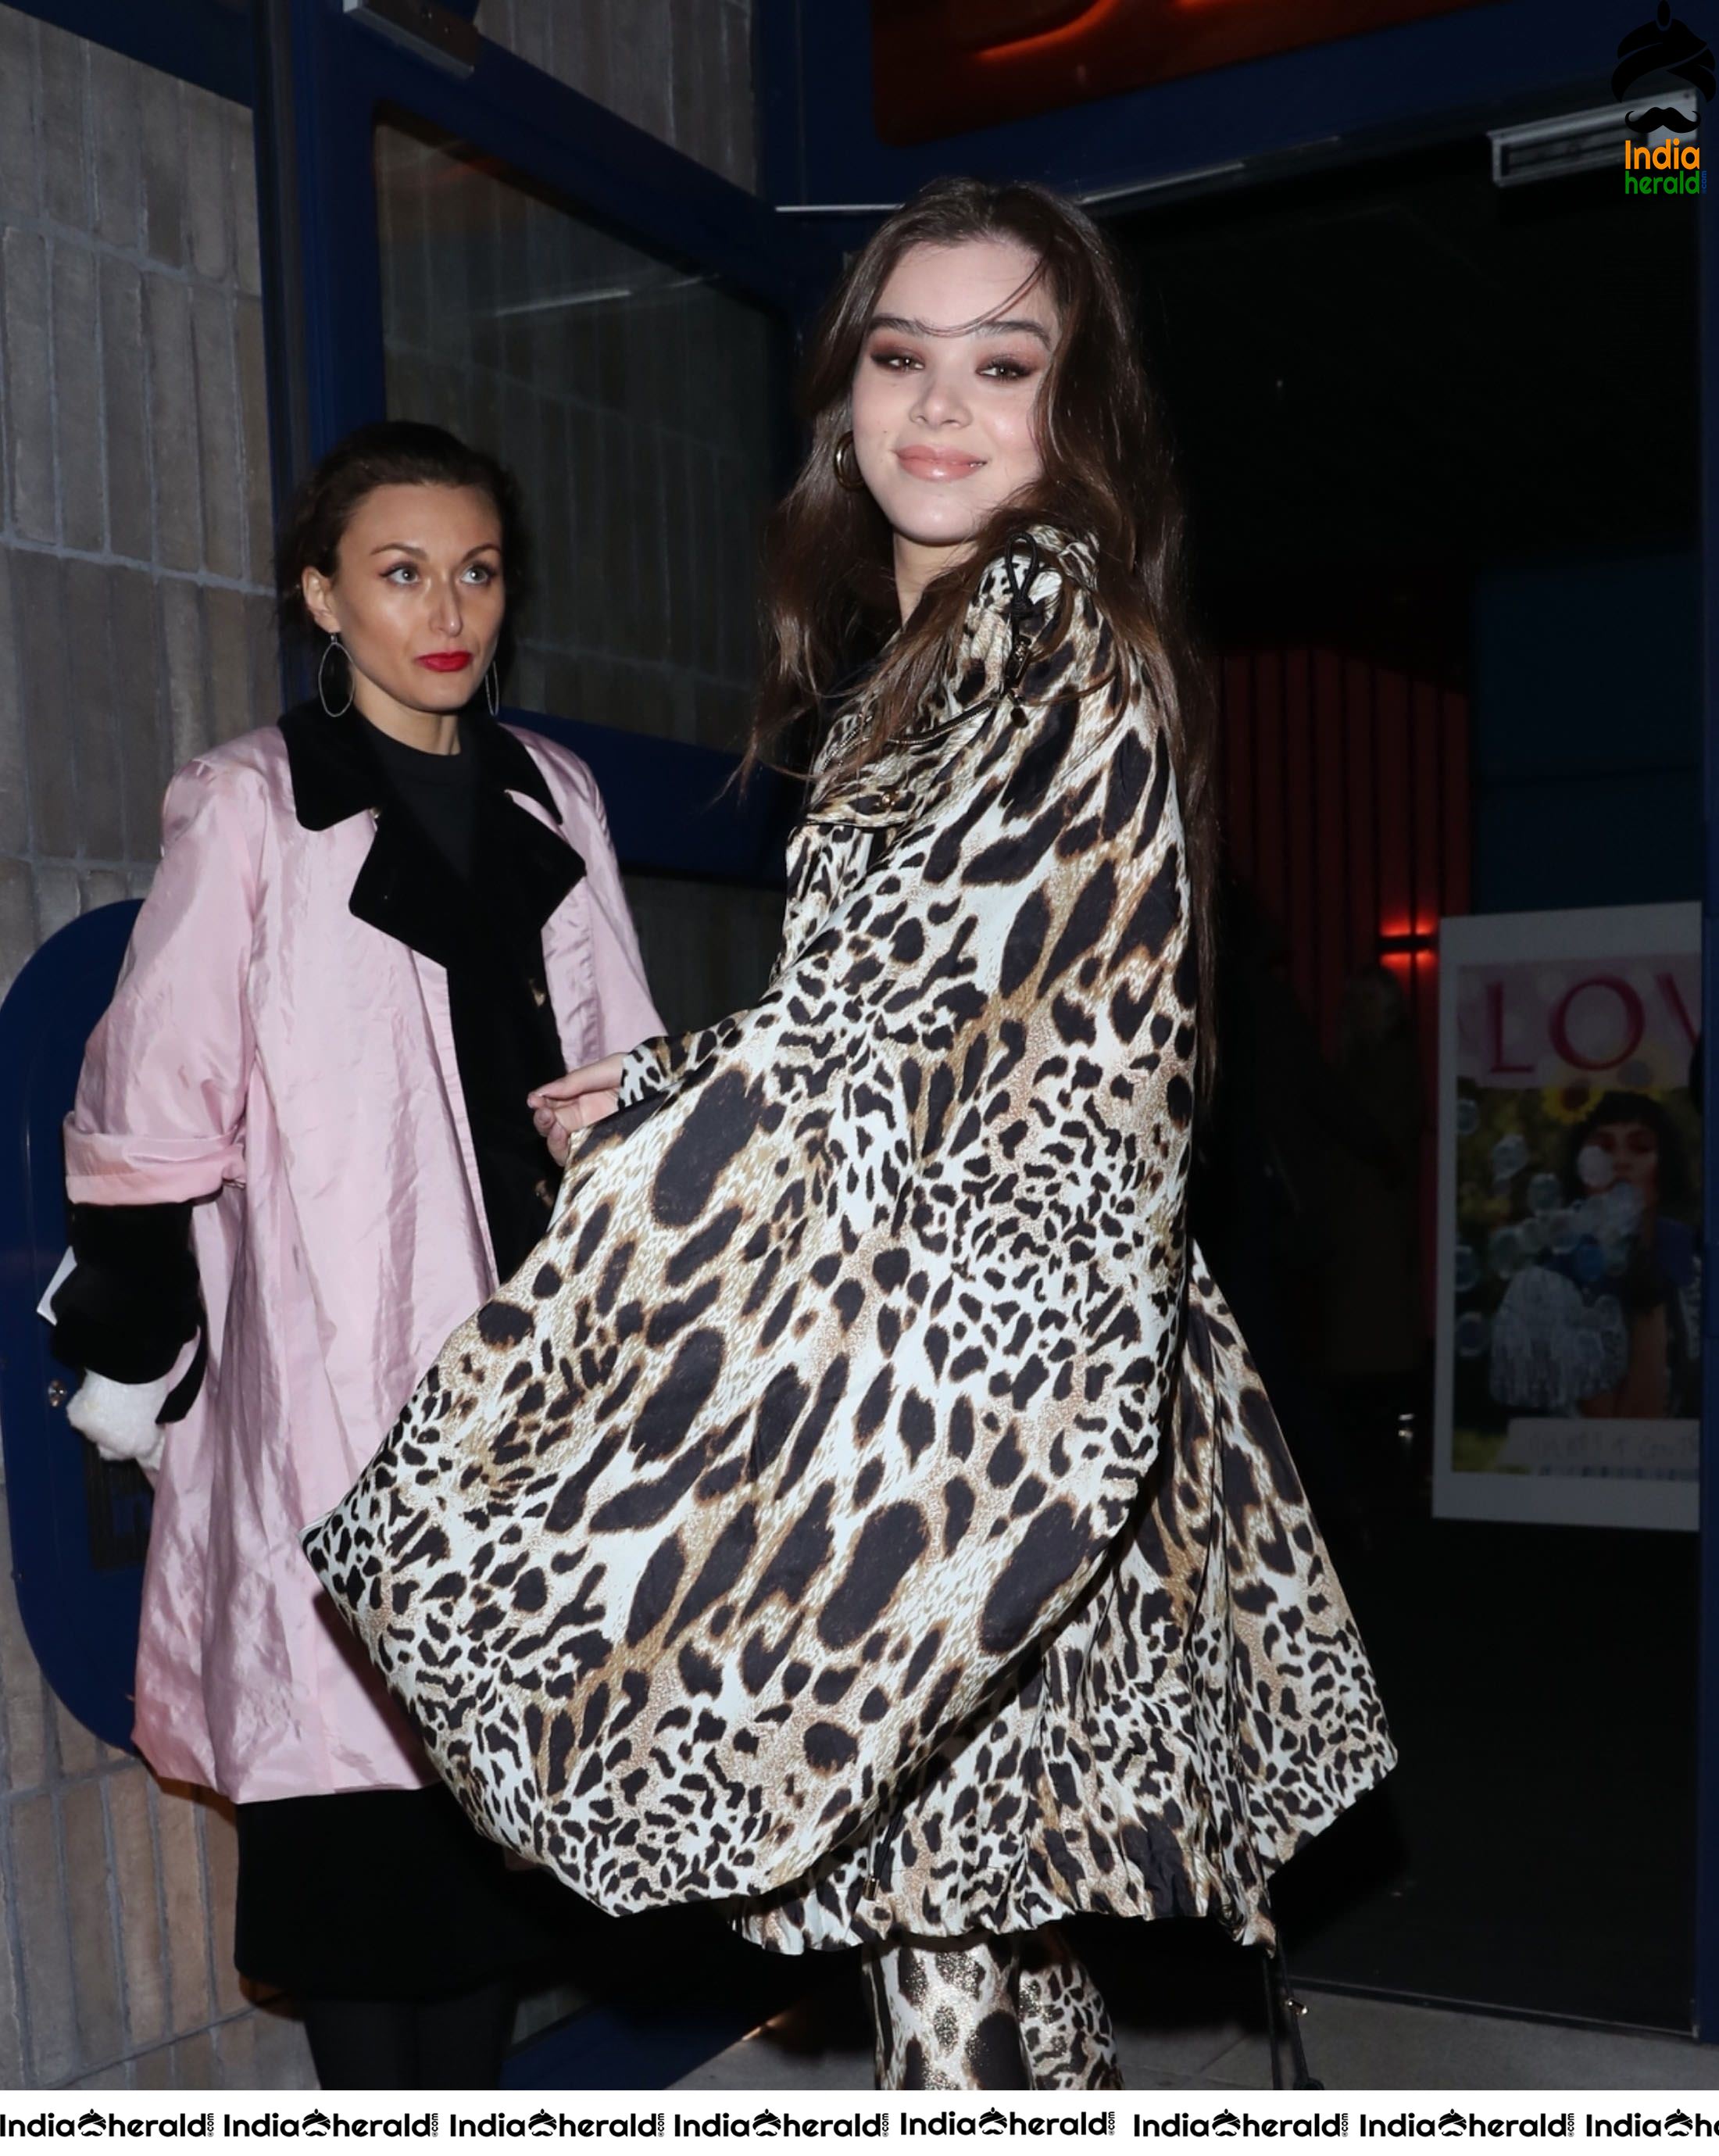 Hailee Steinfeld at LOVE Magazine party in London Fashion Week